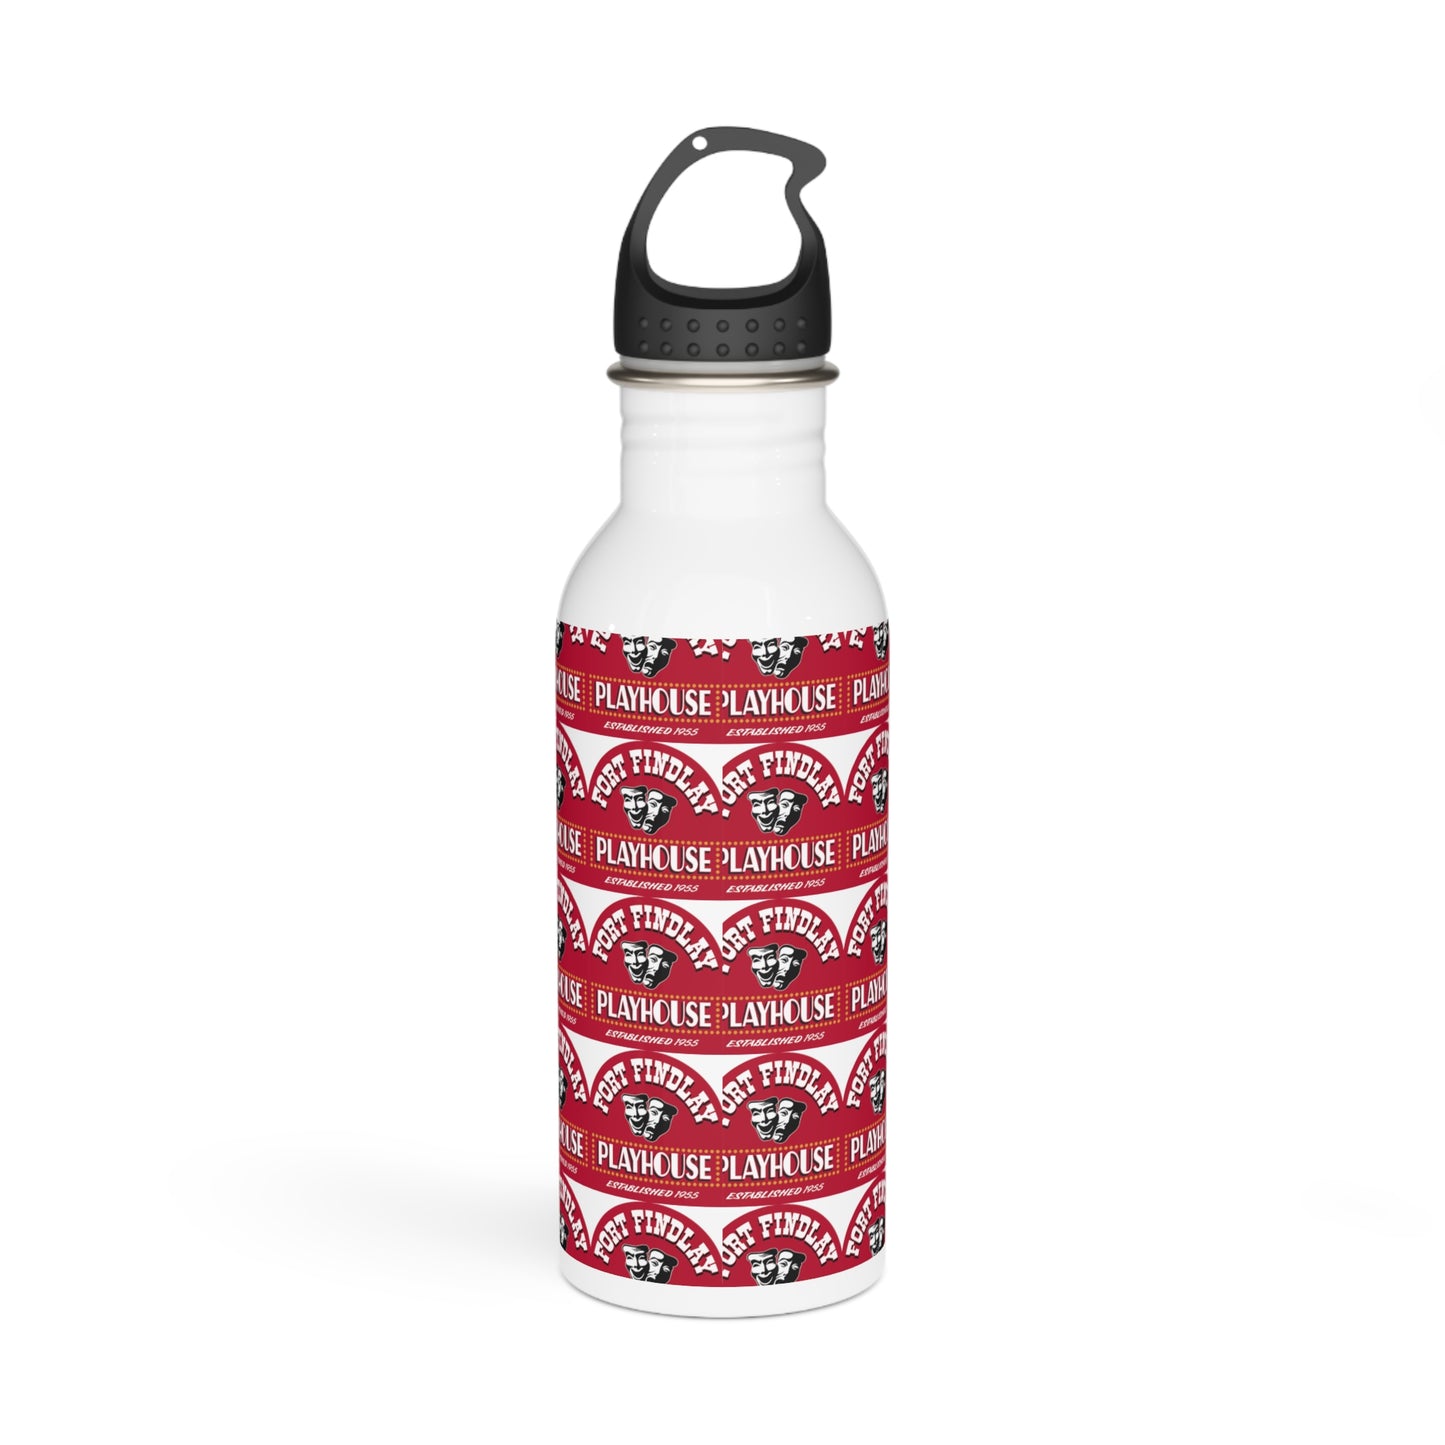 Fort Findlay Playhouse Stainless Steel Water Bottle